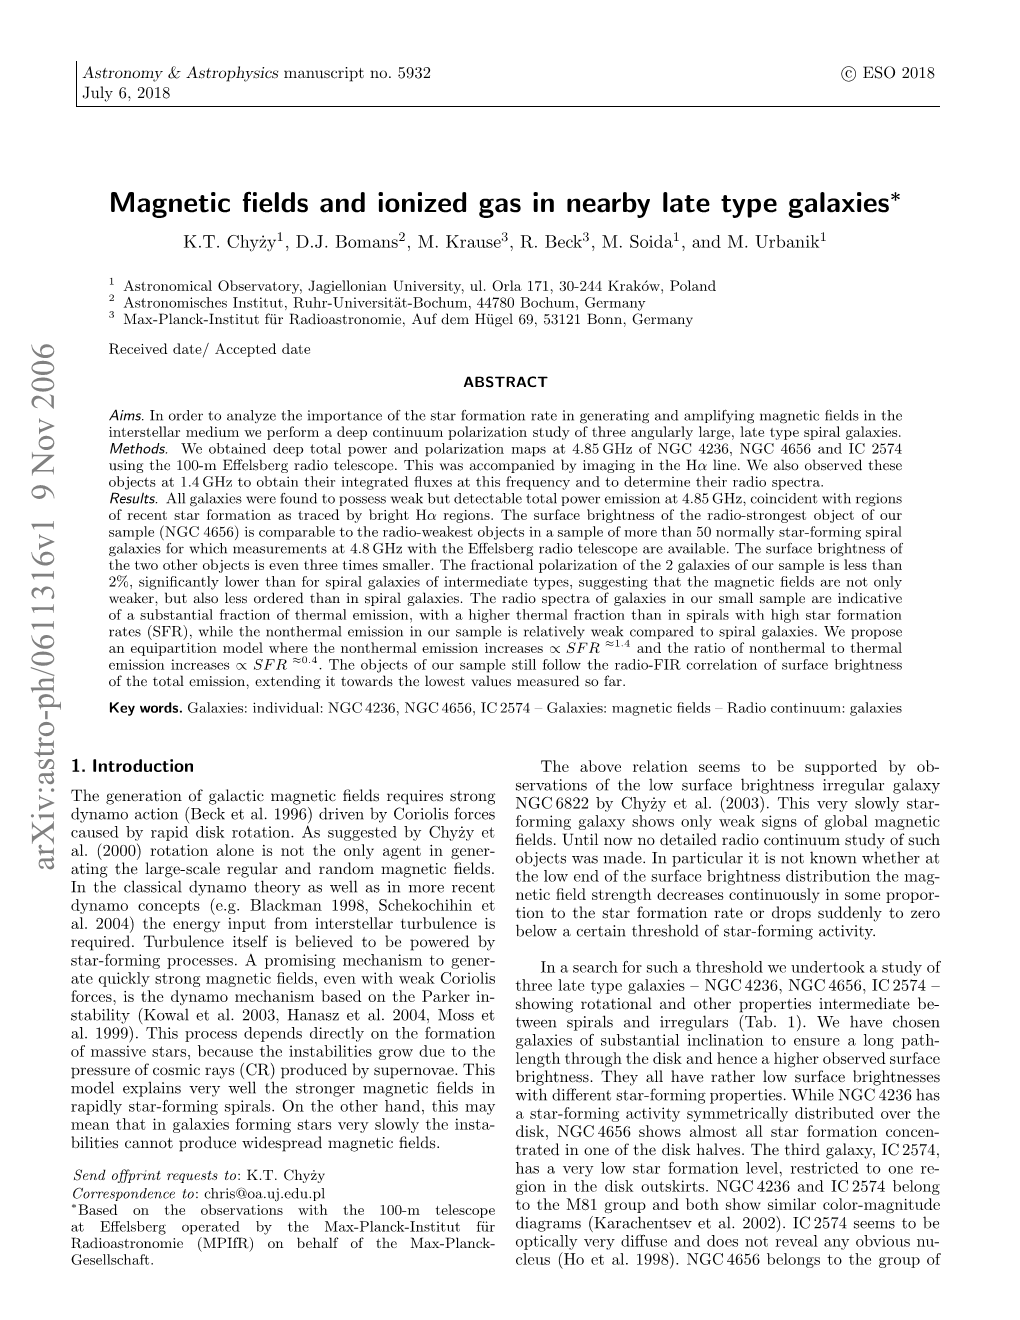 Magnetic Fields and Ionized Gas in Nearby Late Type Galaxies